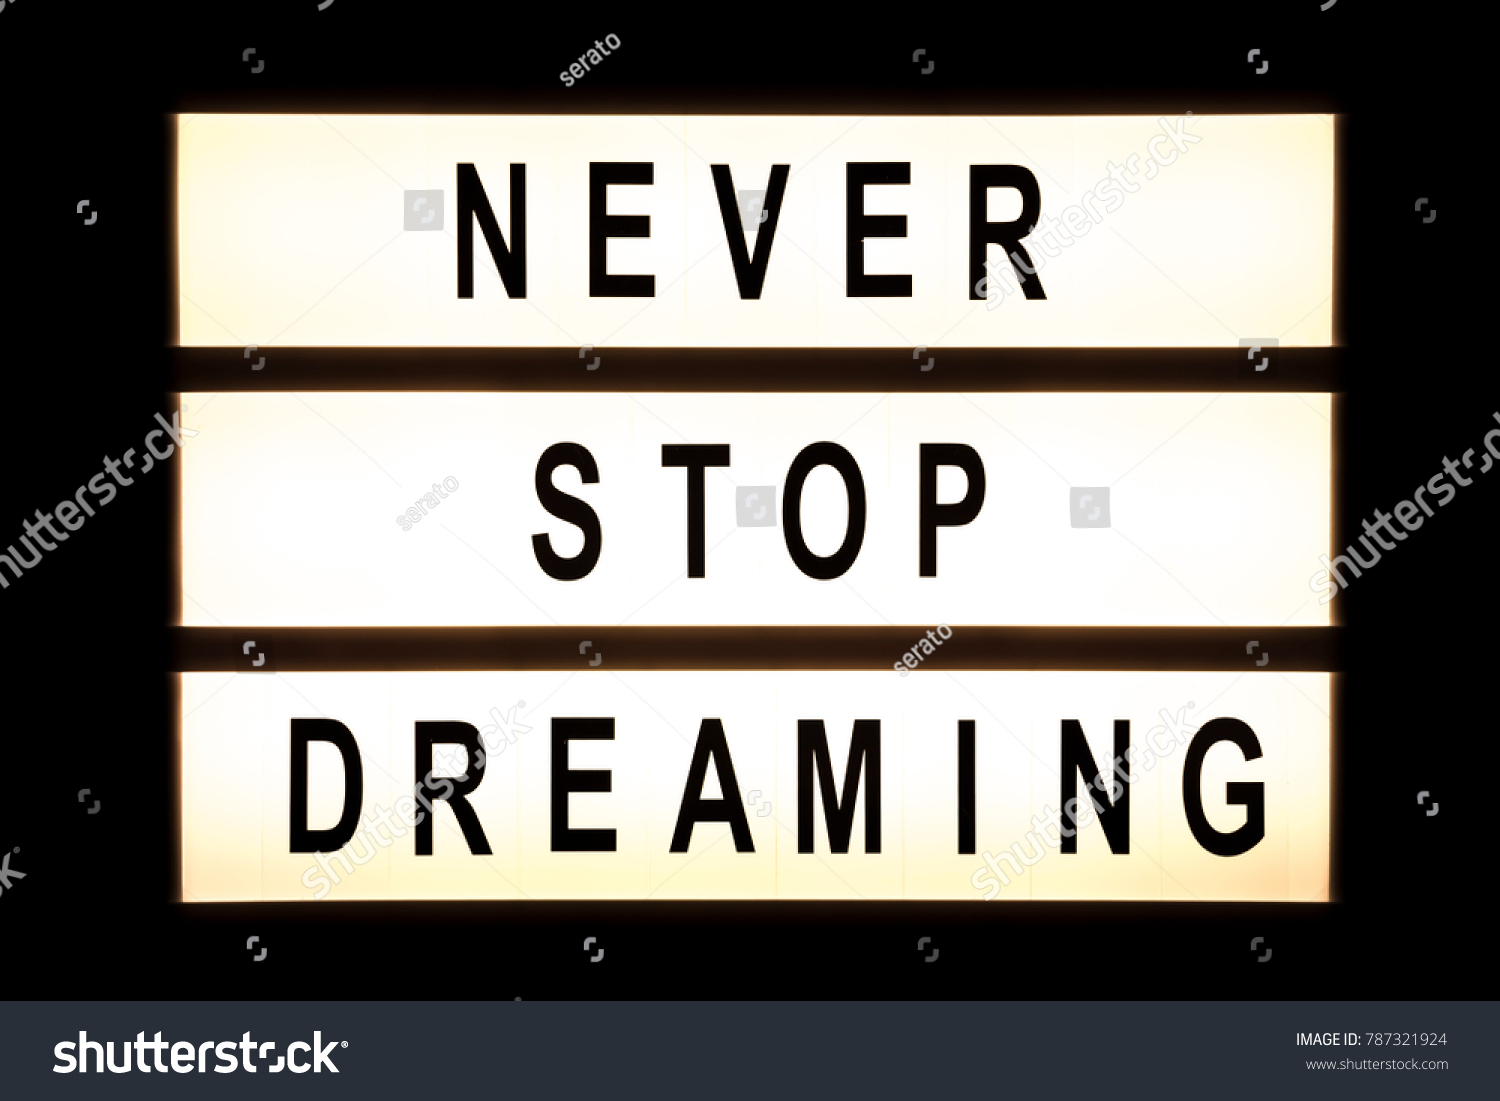 Never stop dreaming hanging light box sign board. #787321924